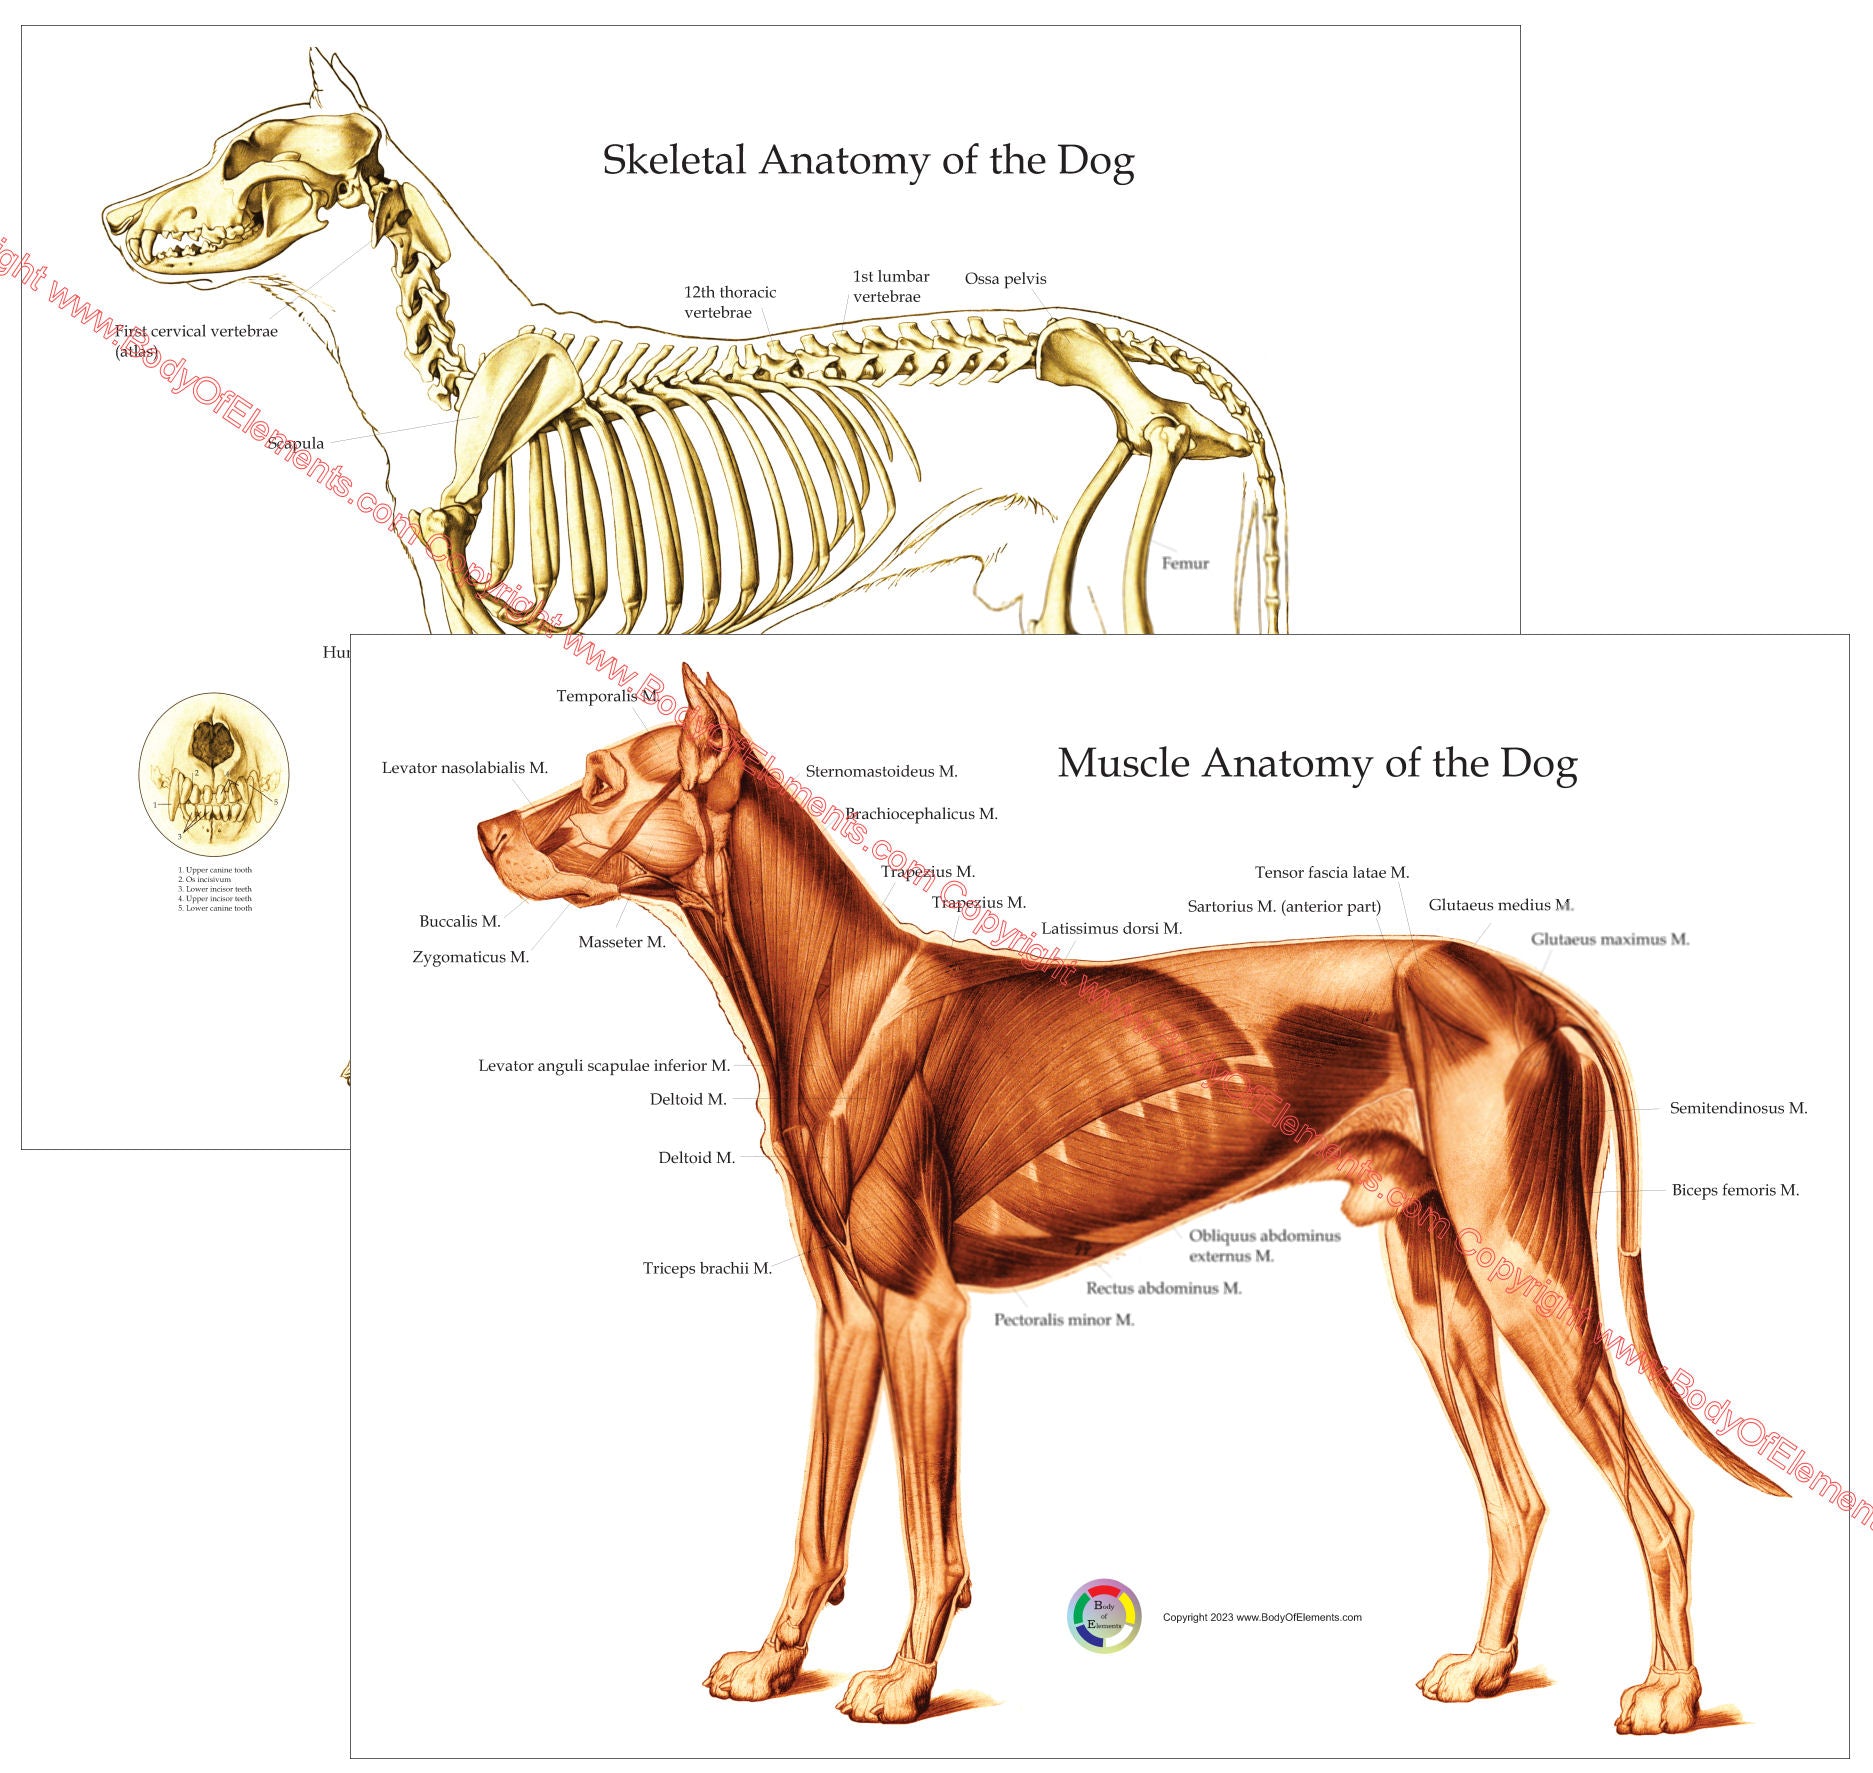 Dog muscles and bones anatomy poster